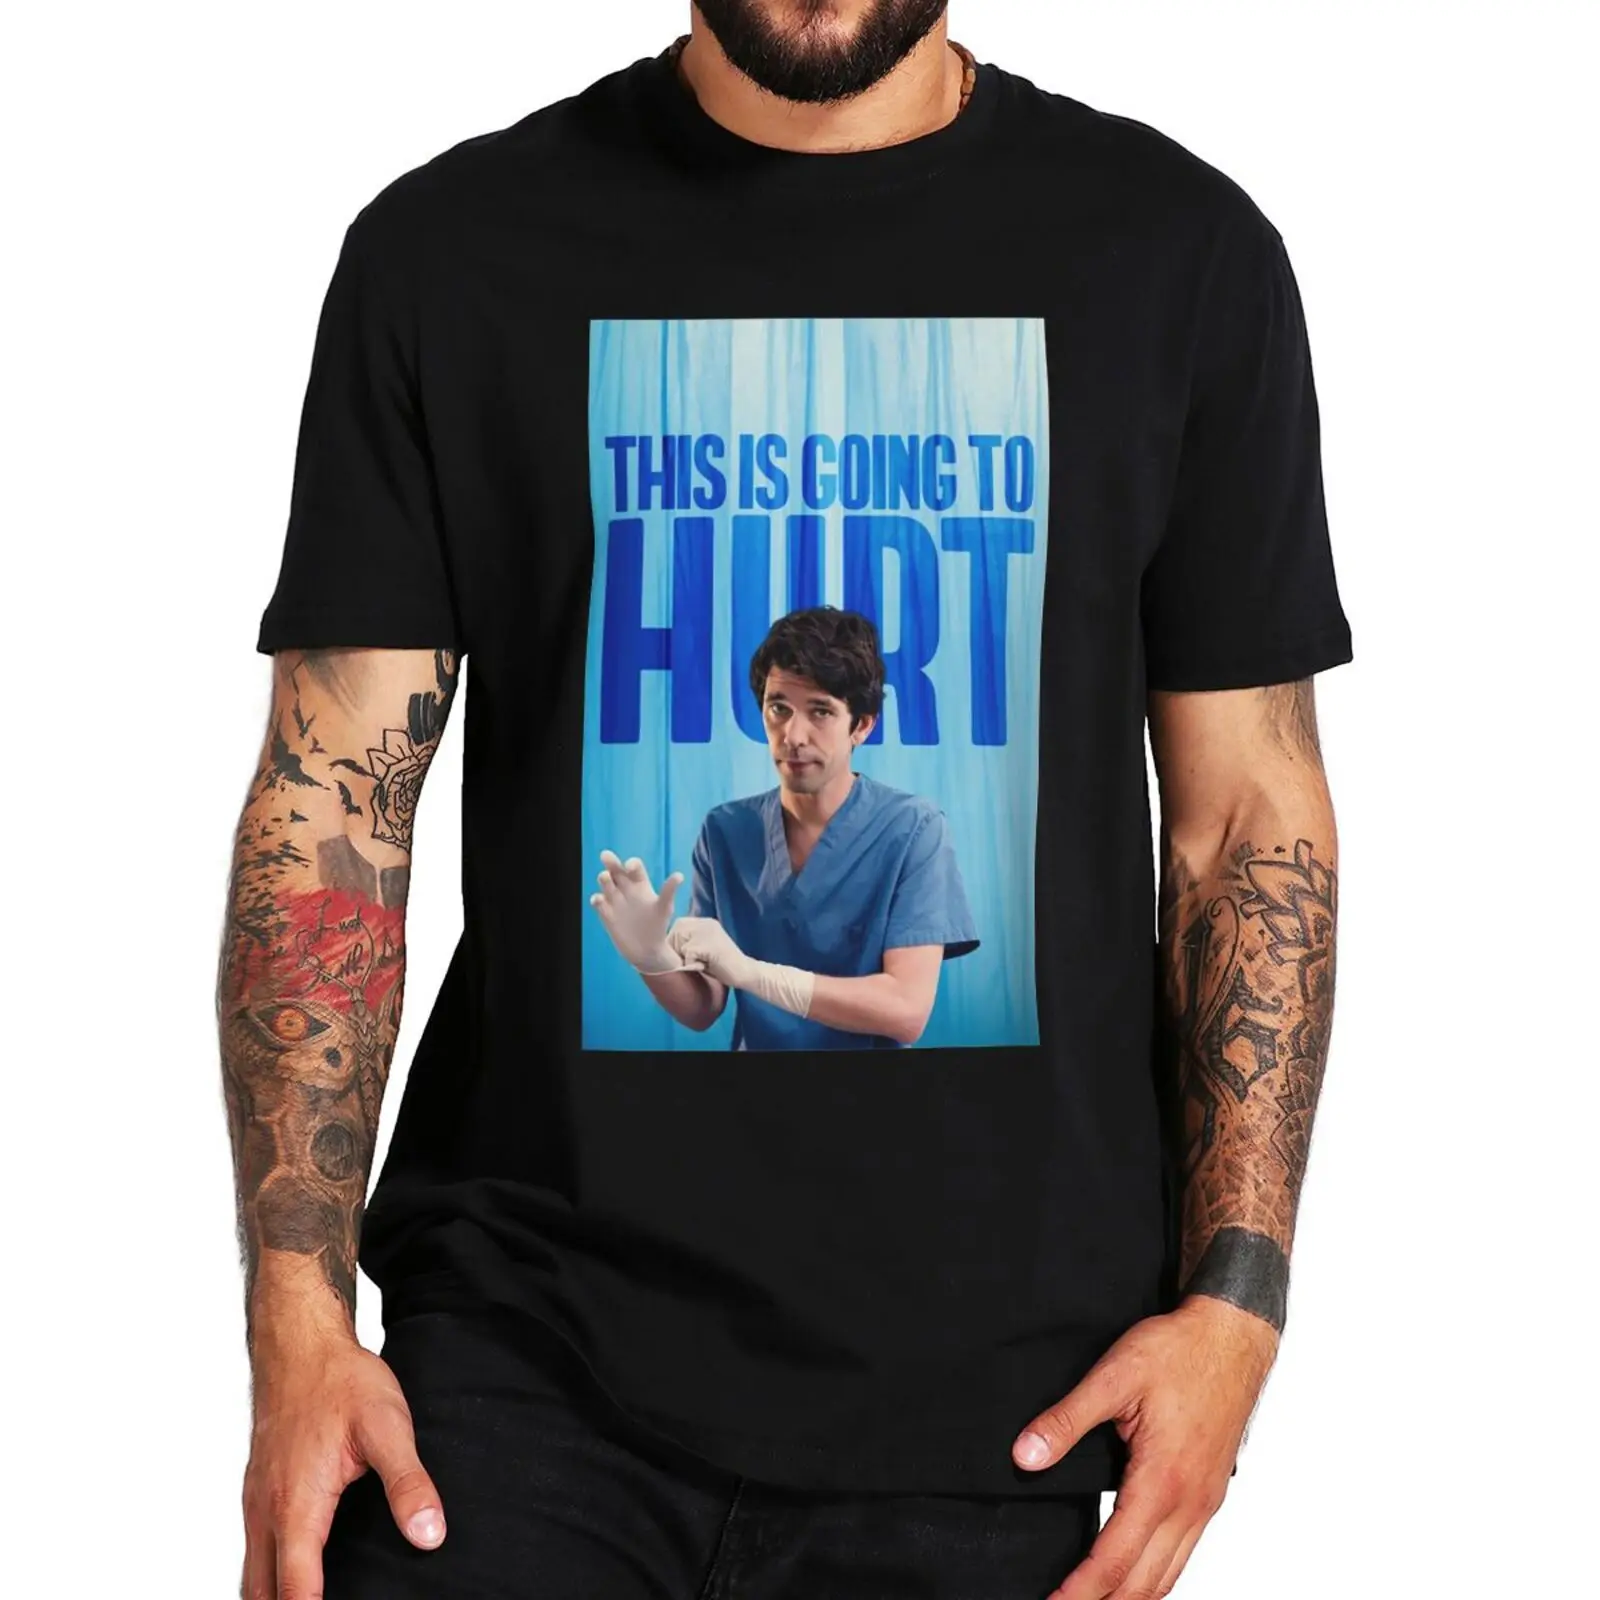 

This Is Going To Hurt T Shirt Adam Kay British Medical Comedy-drama Fans Tee Tops Casual Summer 100% Cotton T-shirt EU Size